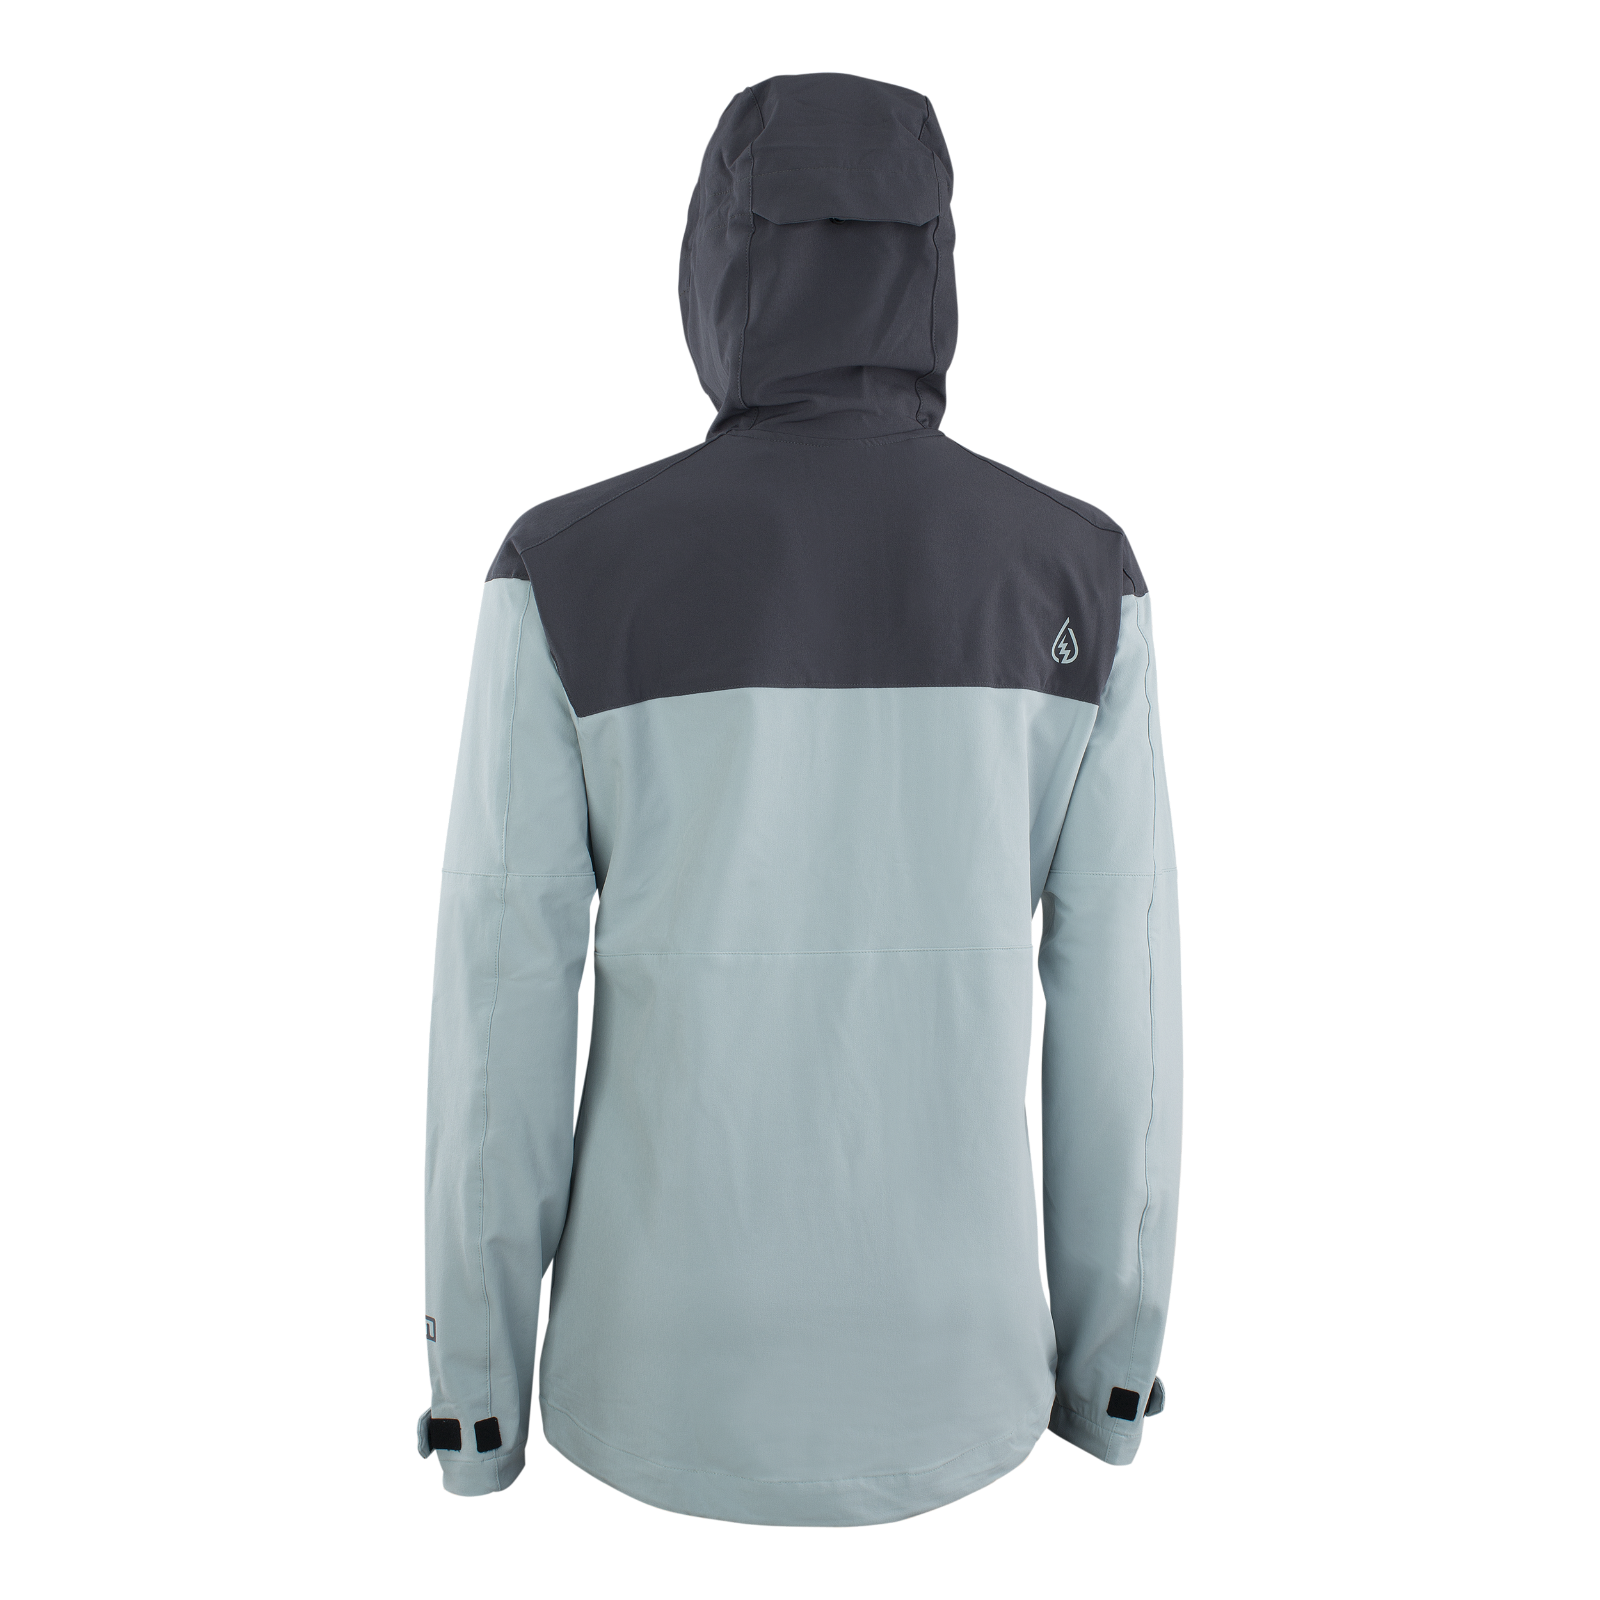 ION Outerwear Shelter Jacket 4W Softshell women 2022-ION Bike-L-blue-47223-5491-9010583023687-Surf-store.com